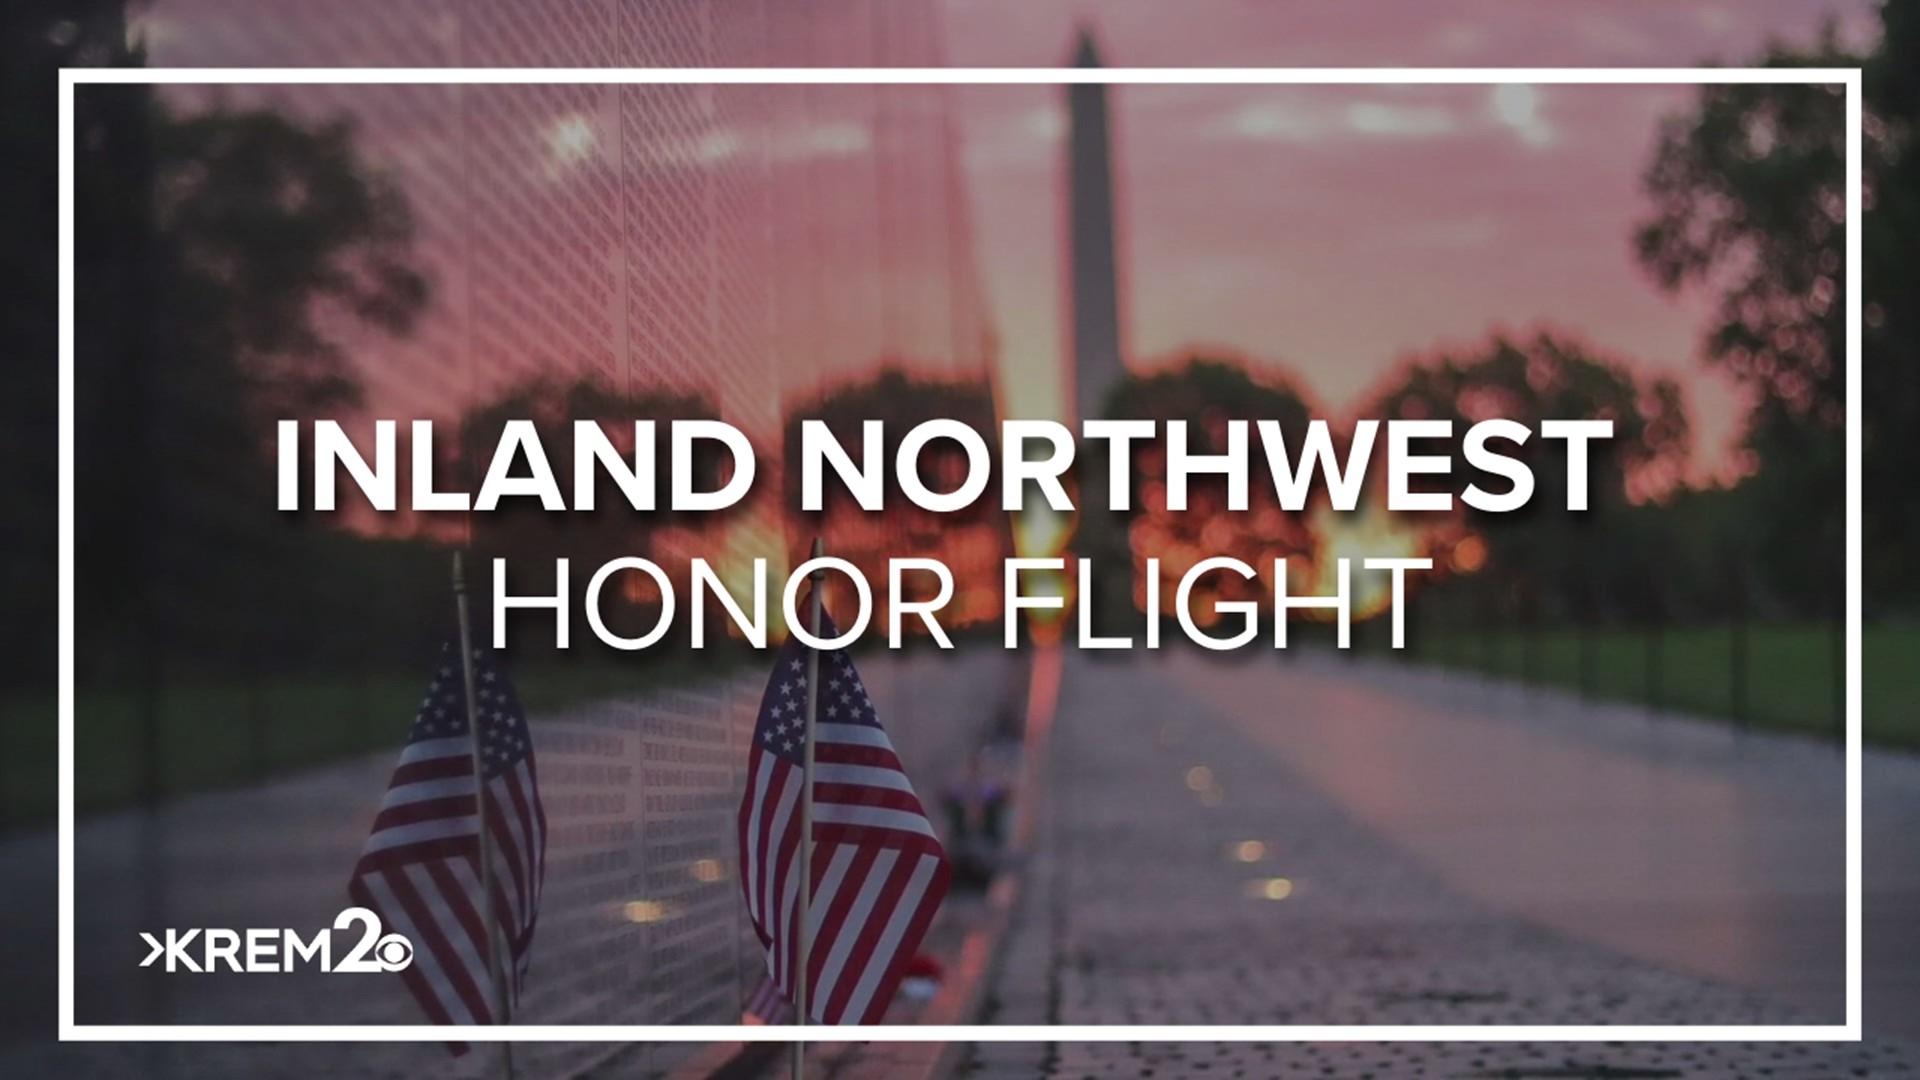 KREM 2 News is dedicated to working with Inland Northwest Honor Flight to send our local veterans to Washington, D.C., to see the memorials in their honor.